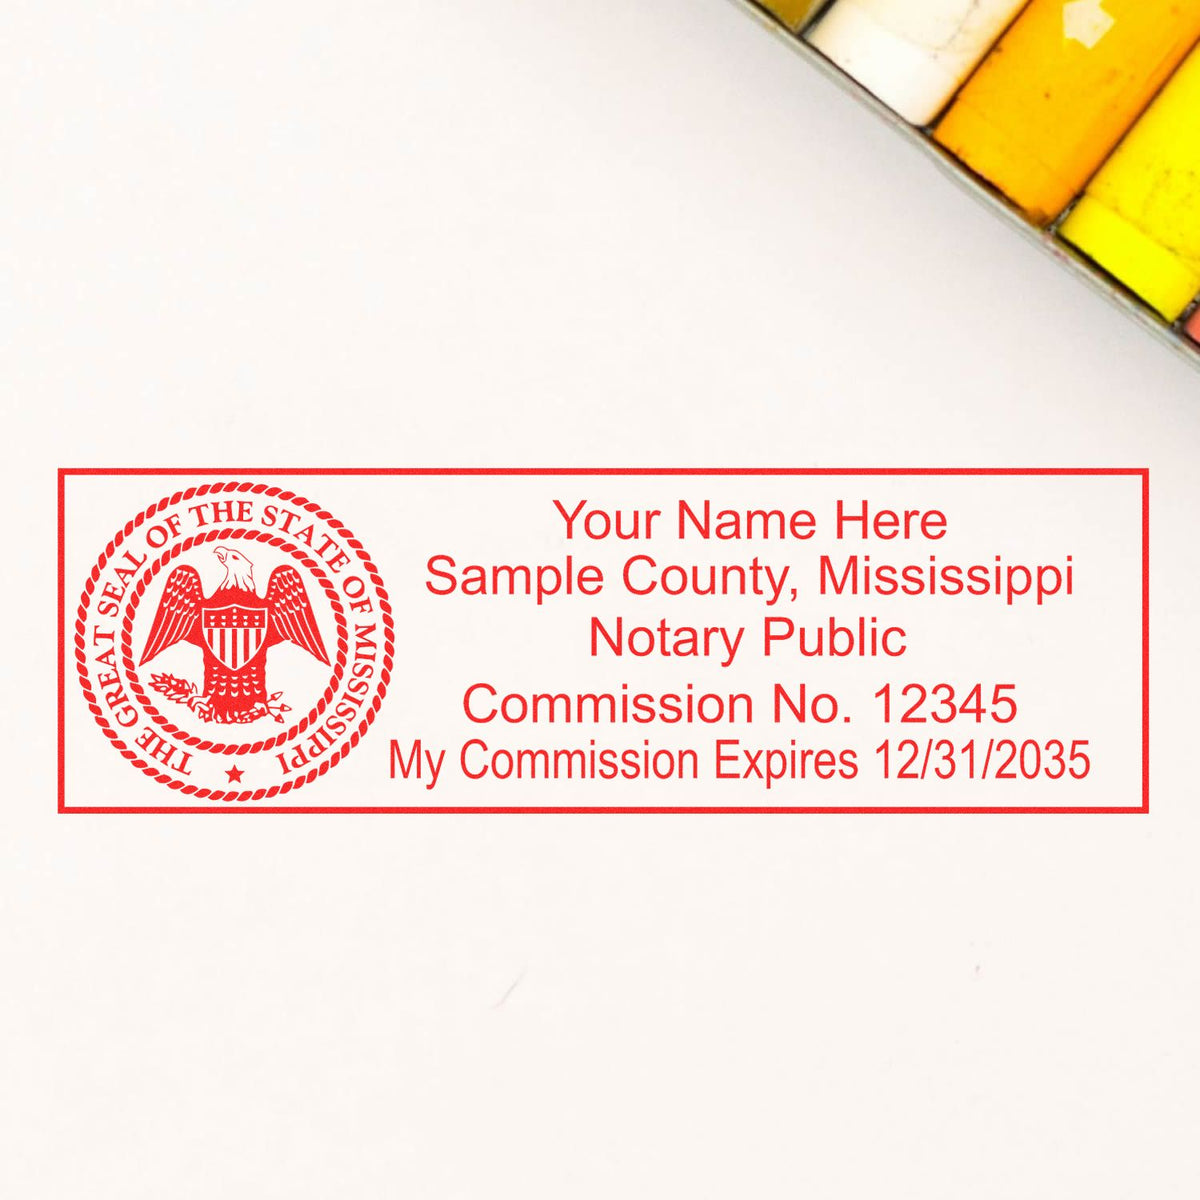 Another Example of a stamped impression of the Super Slim Mississippi Notary Public Stamp on a piece of office paper.